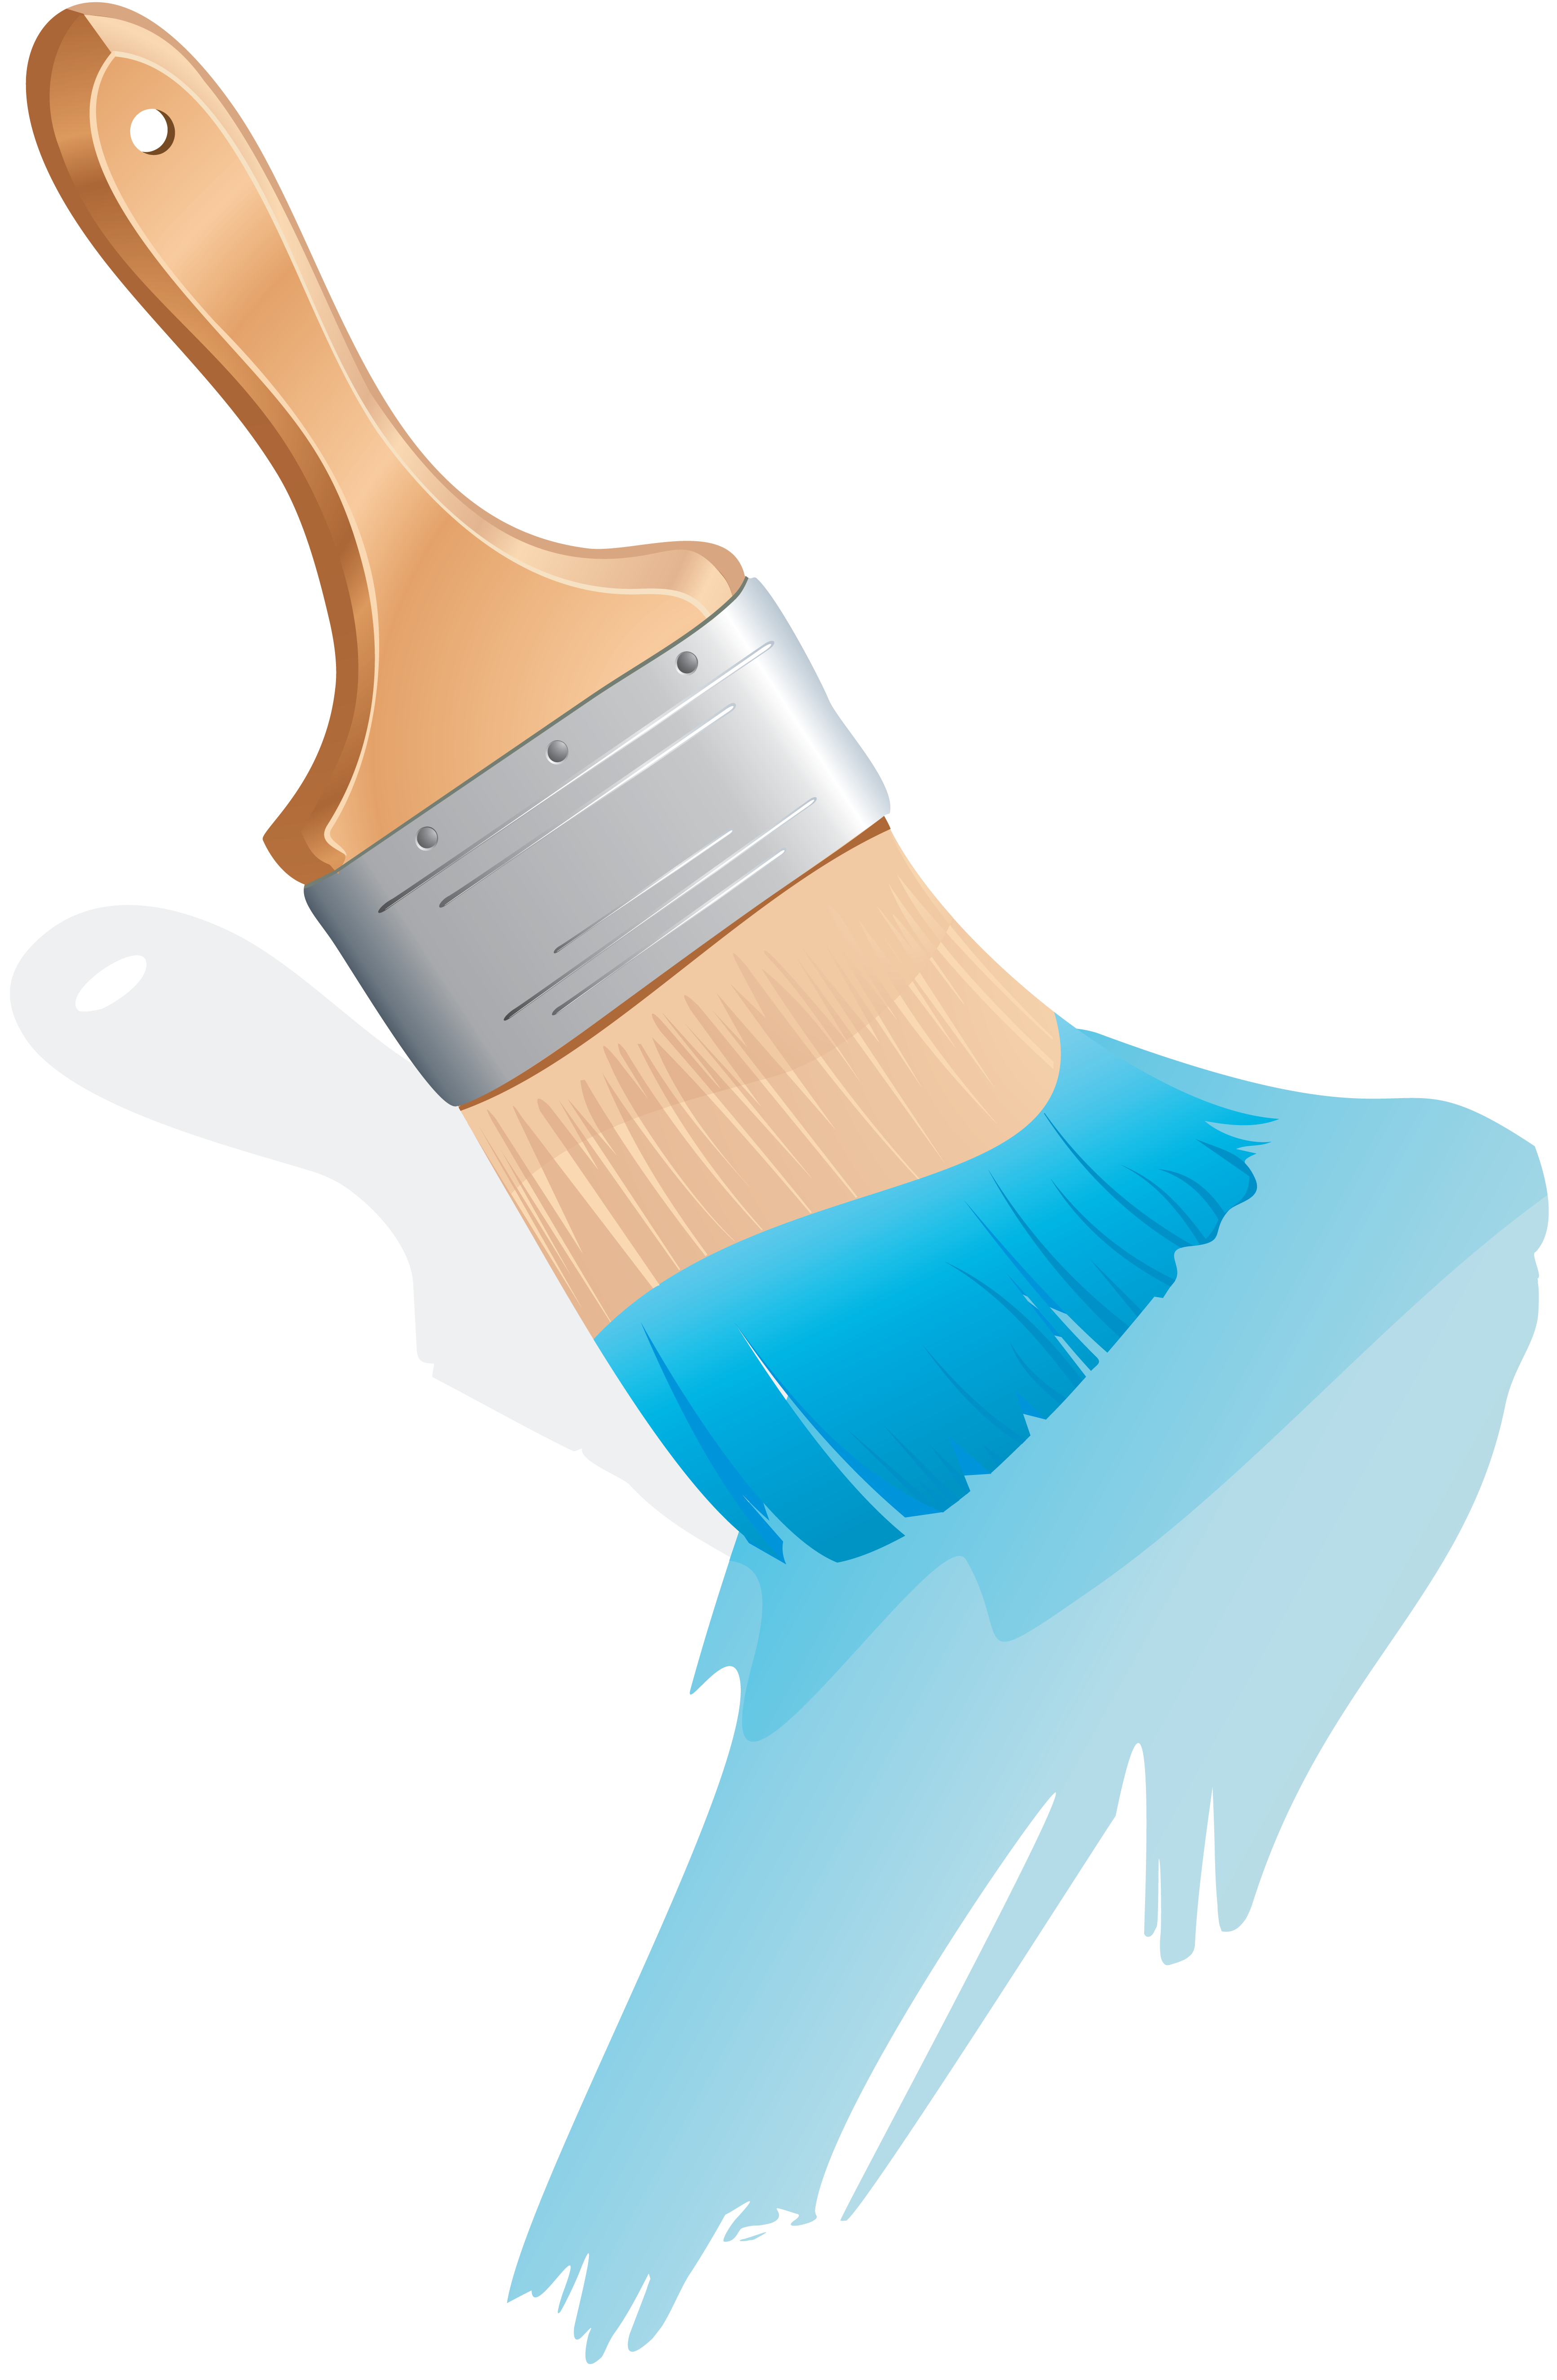 Painting Brush PNG HD Image